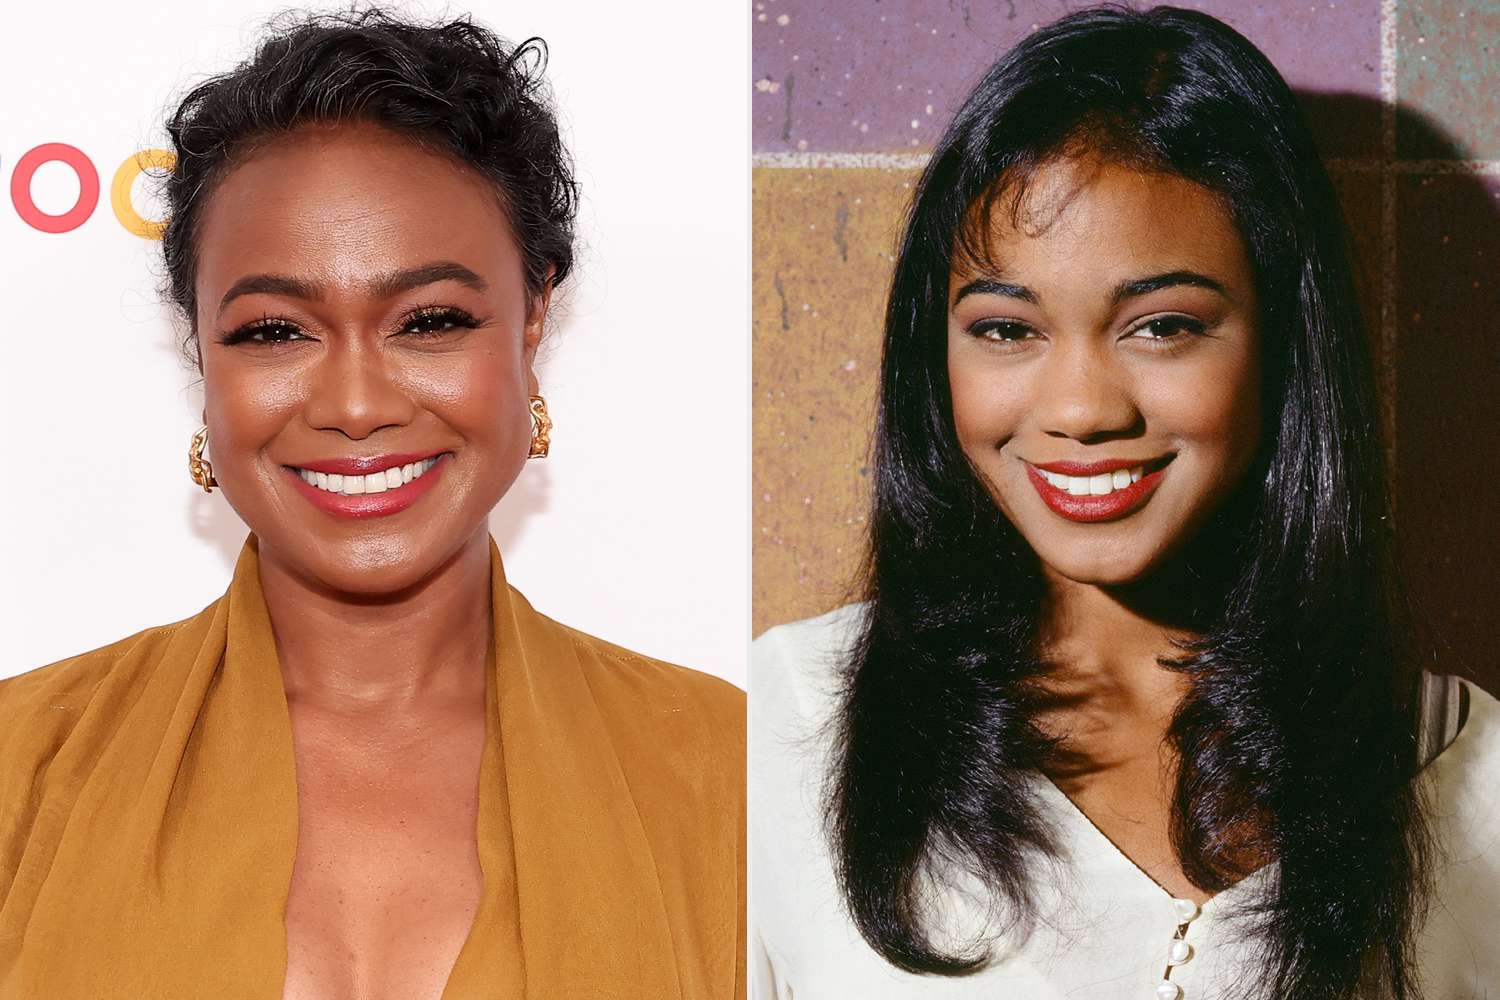 Tatyana Ali Cried After Filming Scene for ‘Fresh Prince’ Reimagining (Exclusive) [Video]